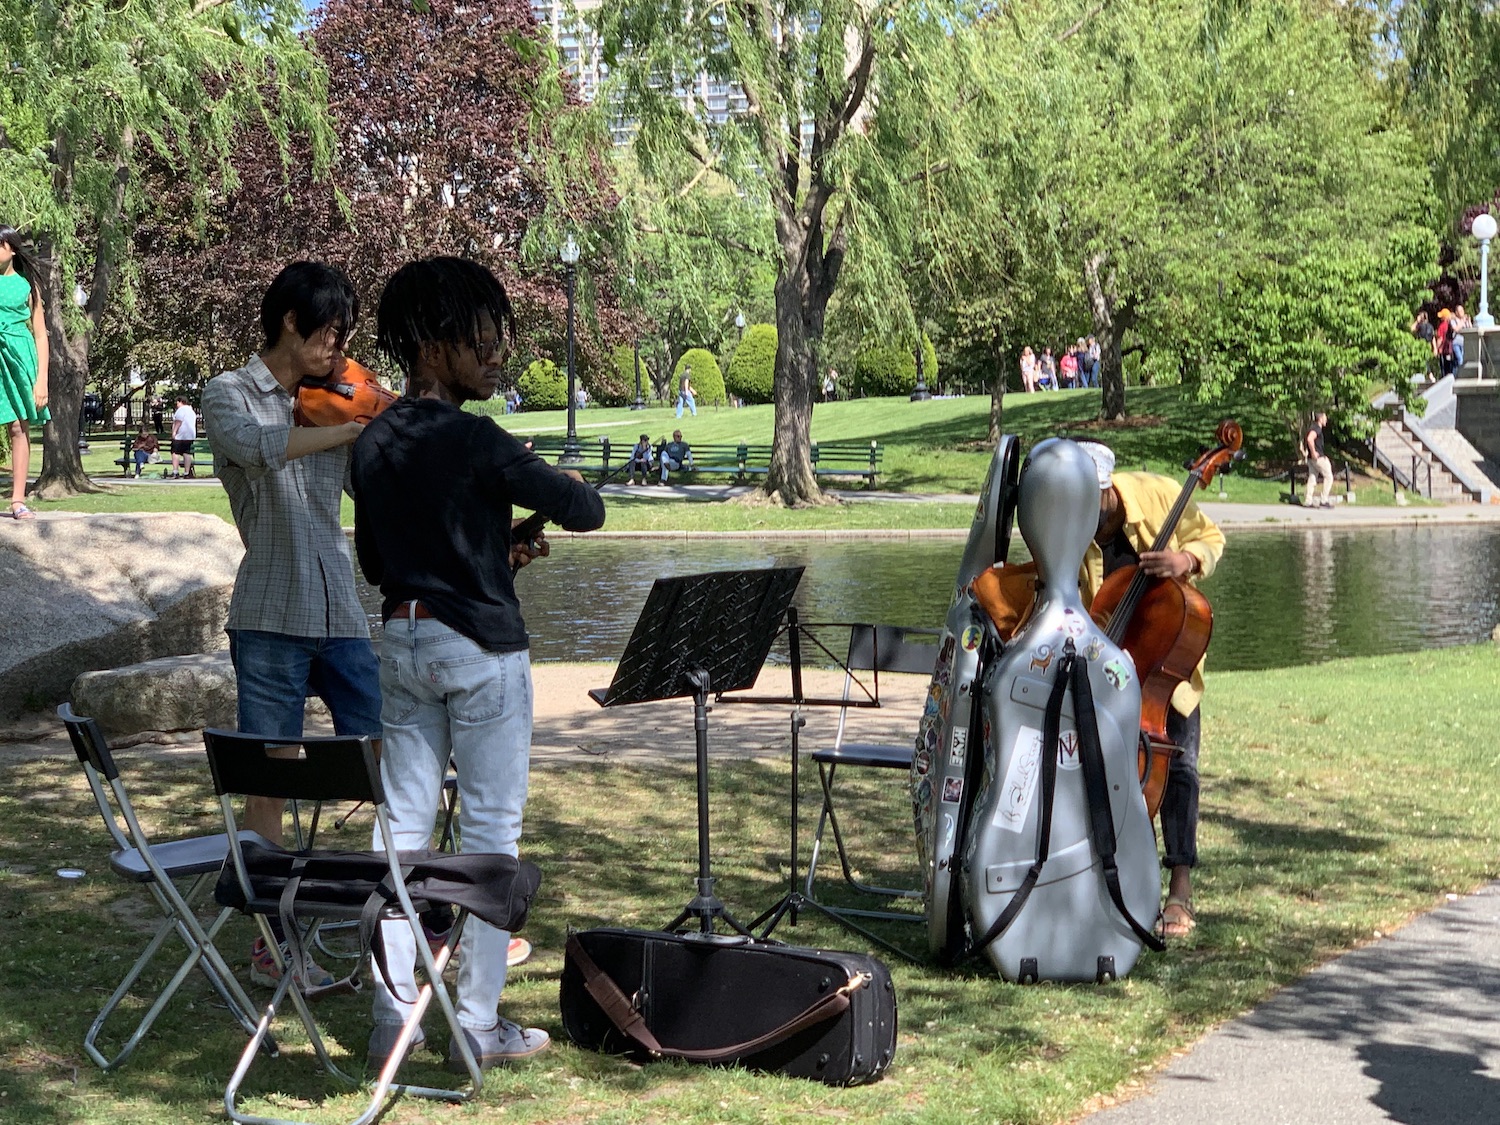 A violist, celloist, and mystery man serenade the Boston Gardens at the peak of summer.